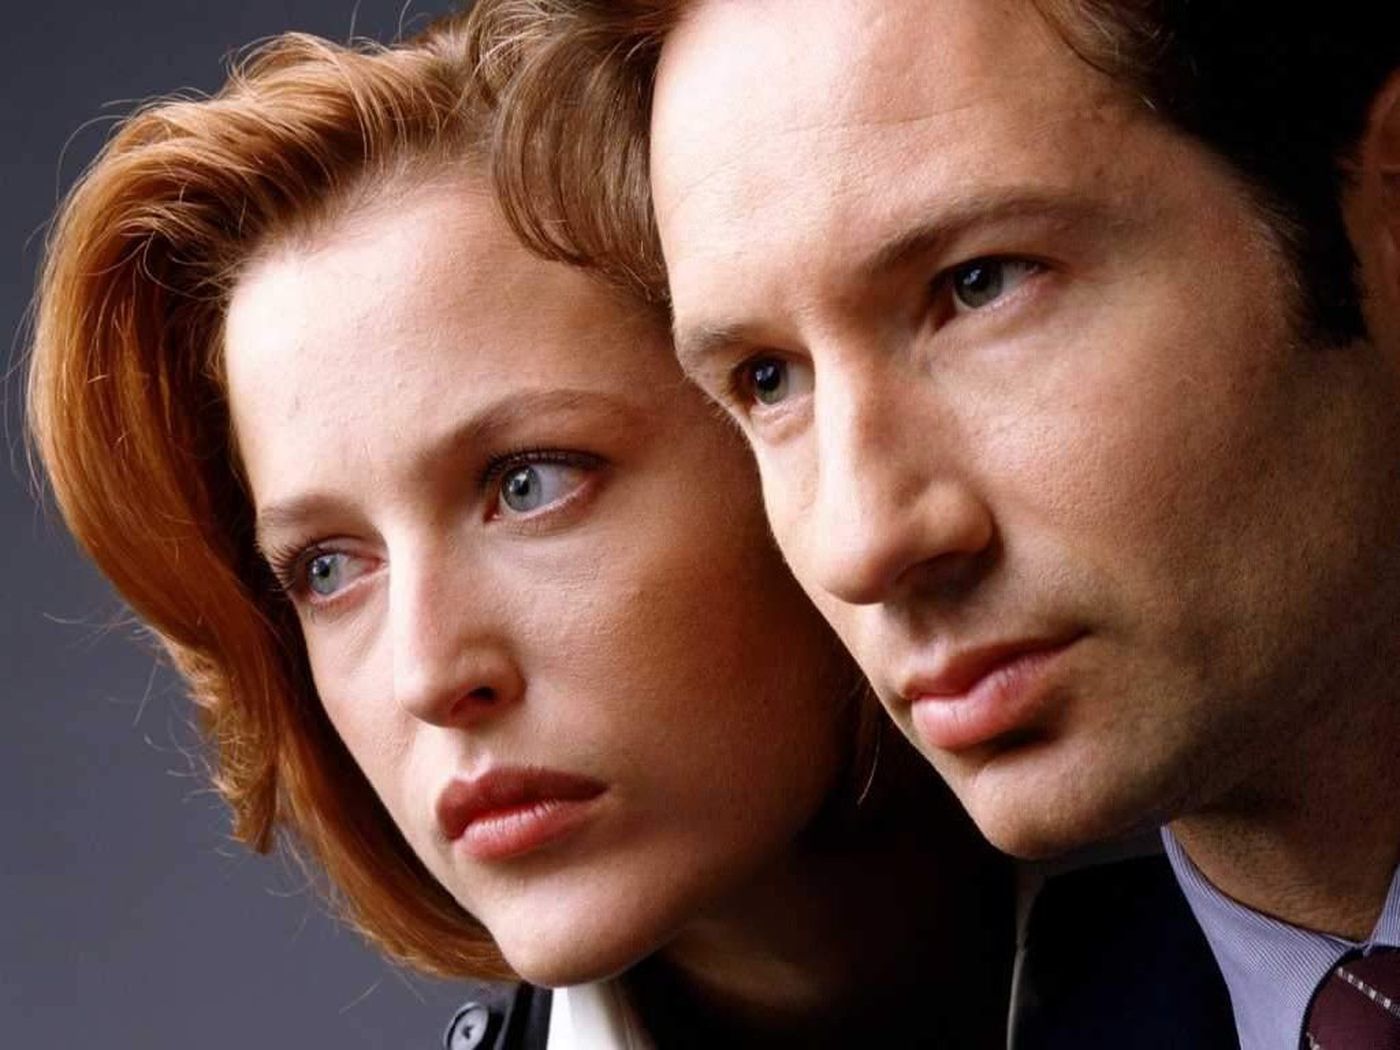 The X-Files' 25th anniversary: how the show invented modern television - Vox